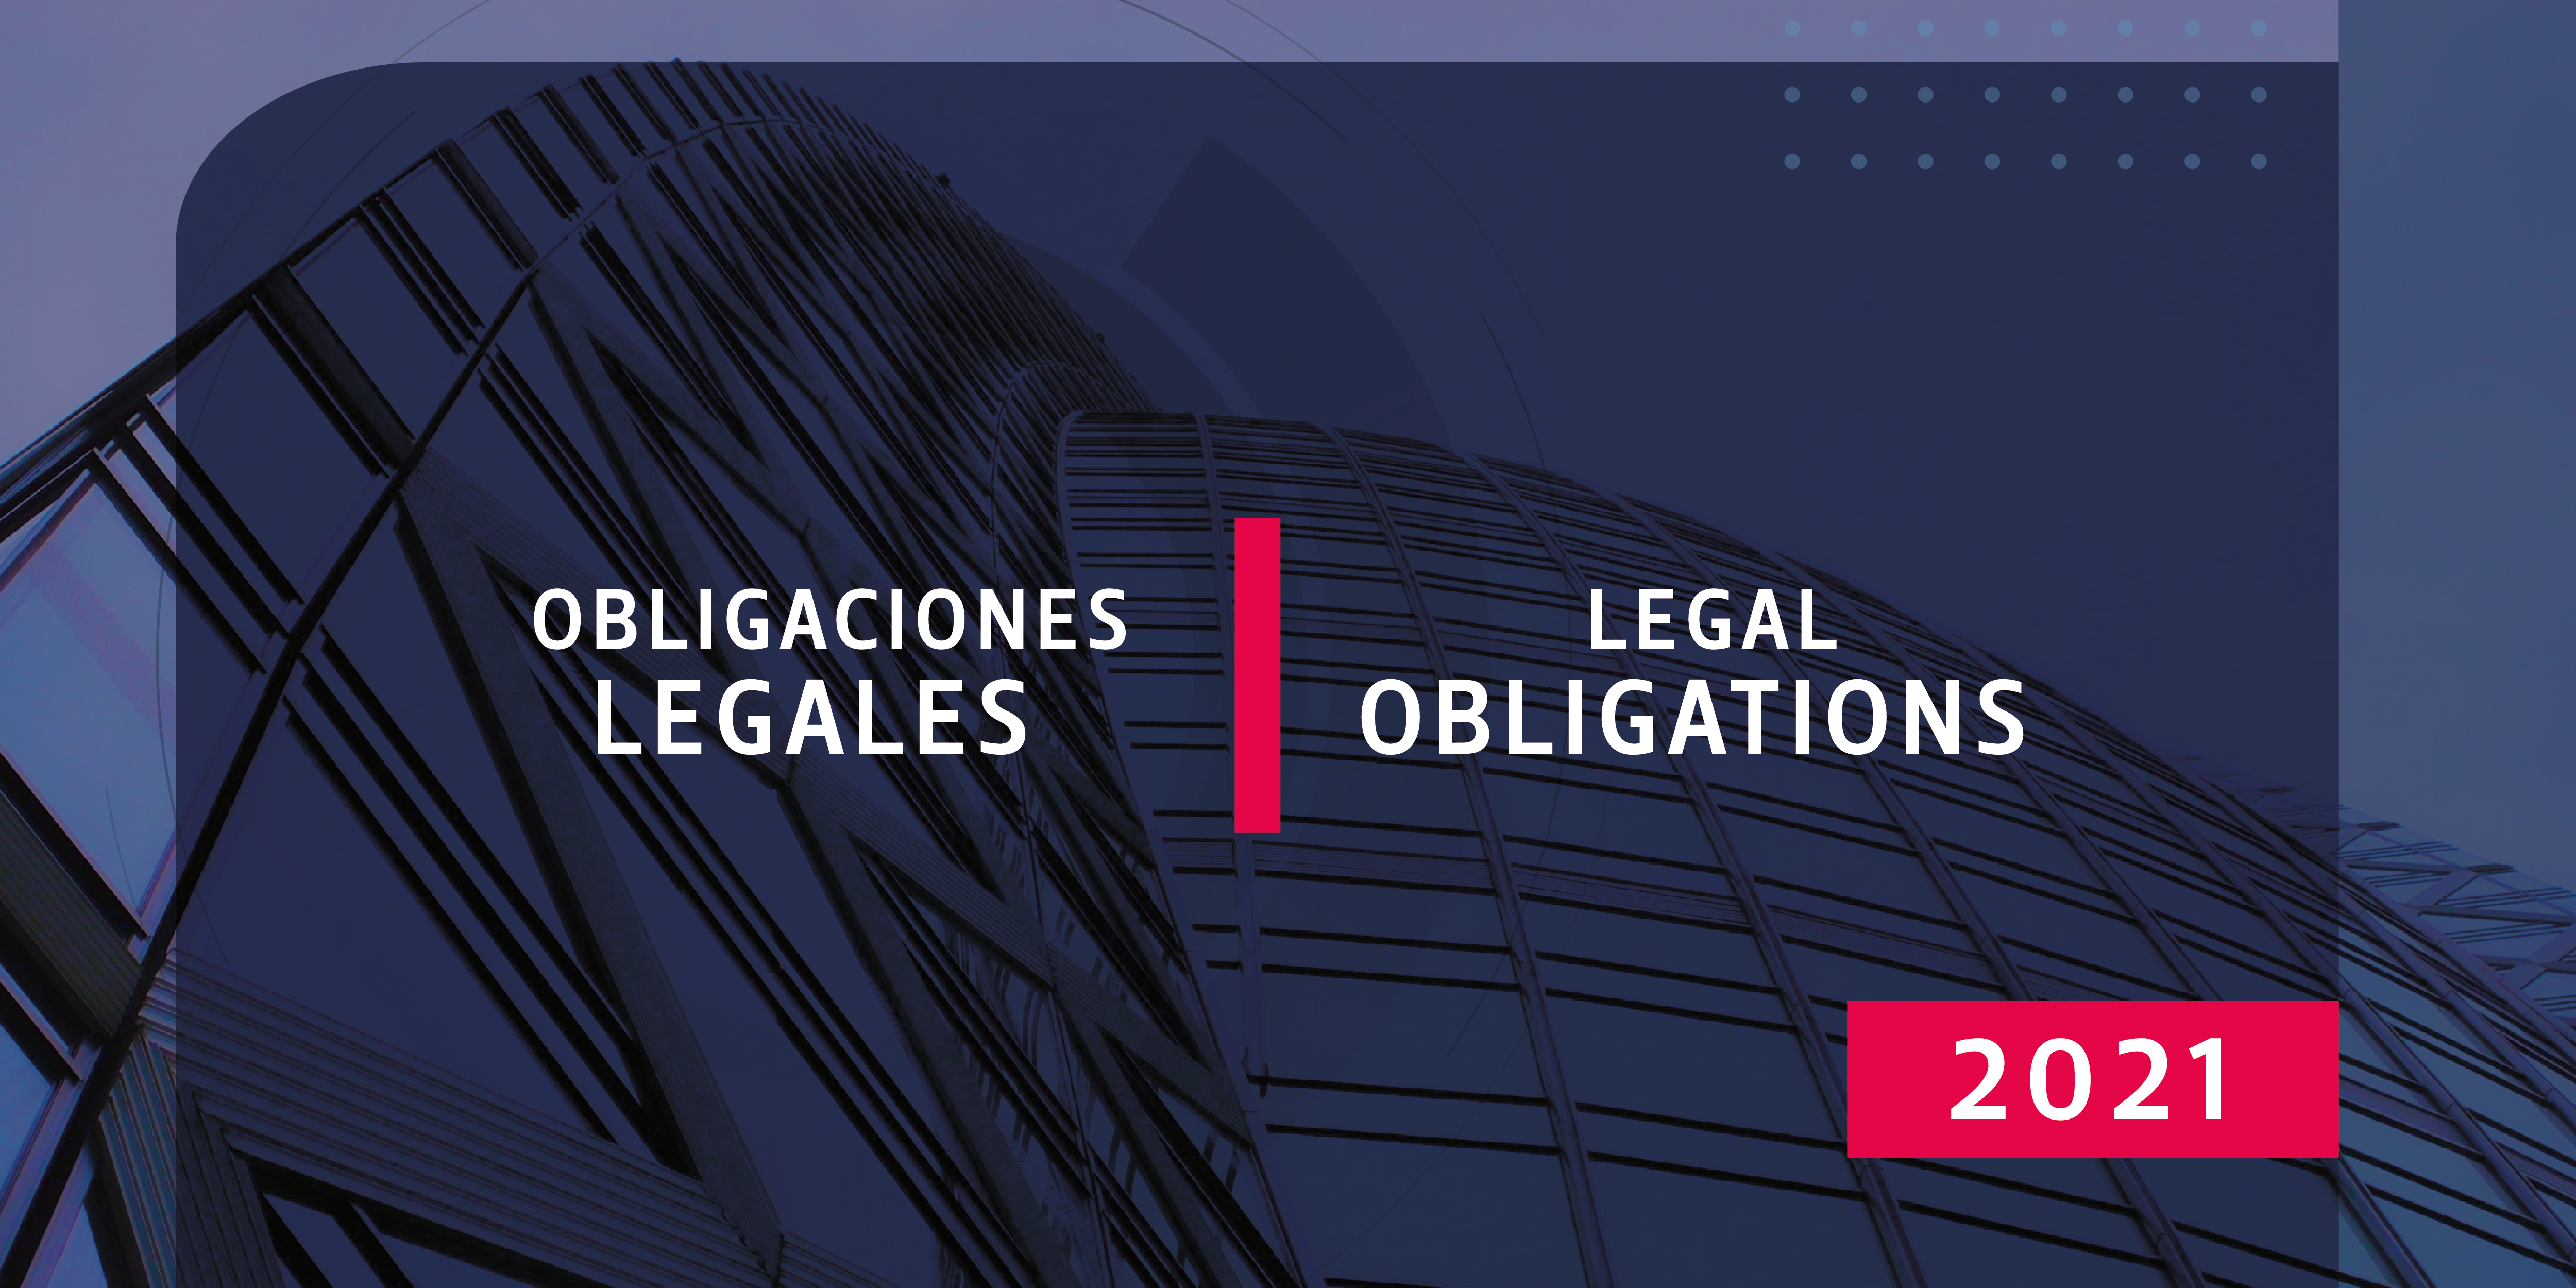 Legal Obligations 2021 - Foreign Company Branches